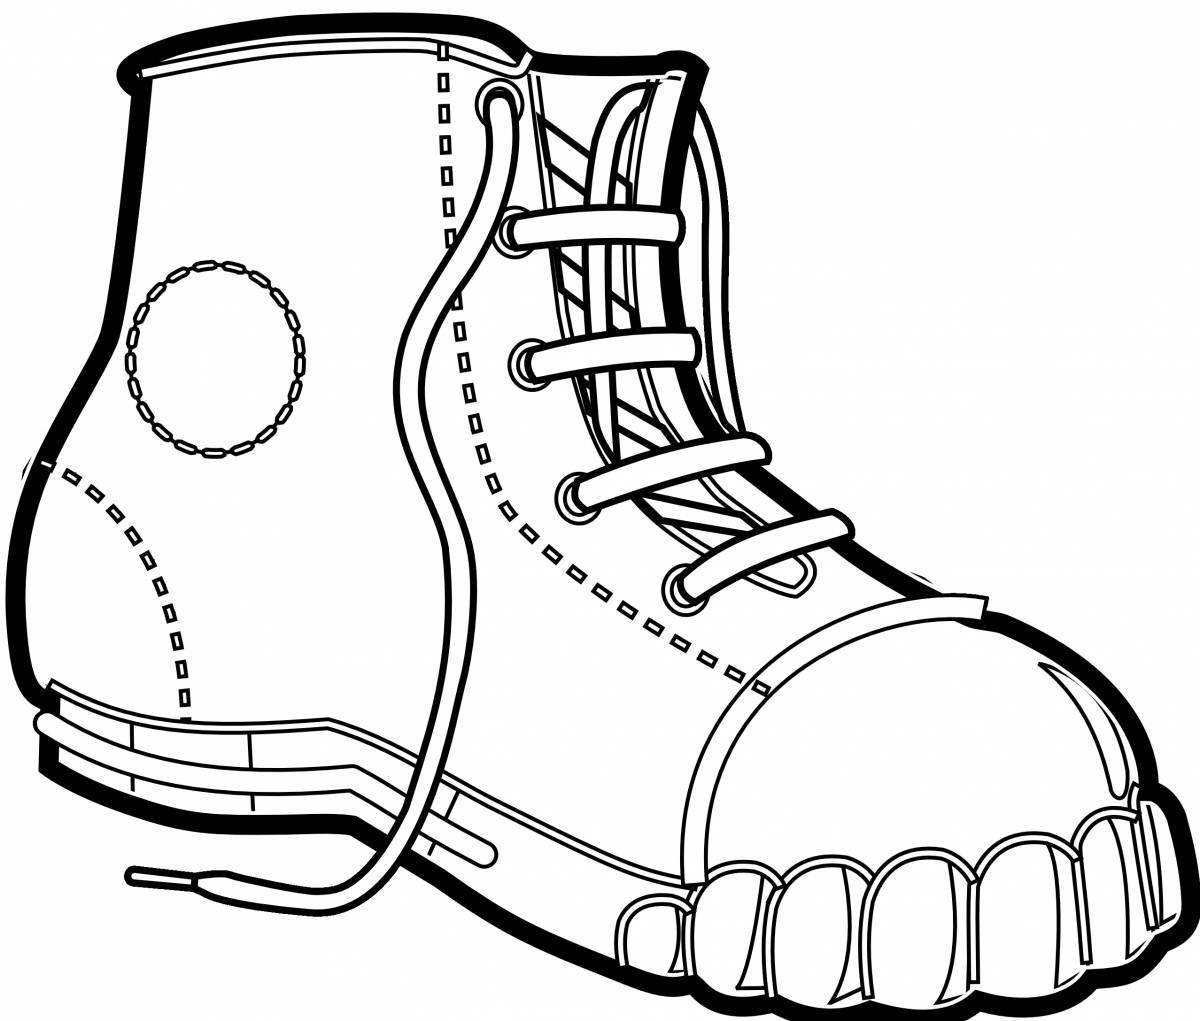 Coloring page magical shoes for children 4-5 years old